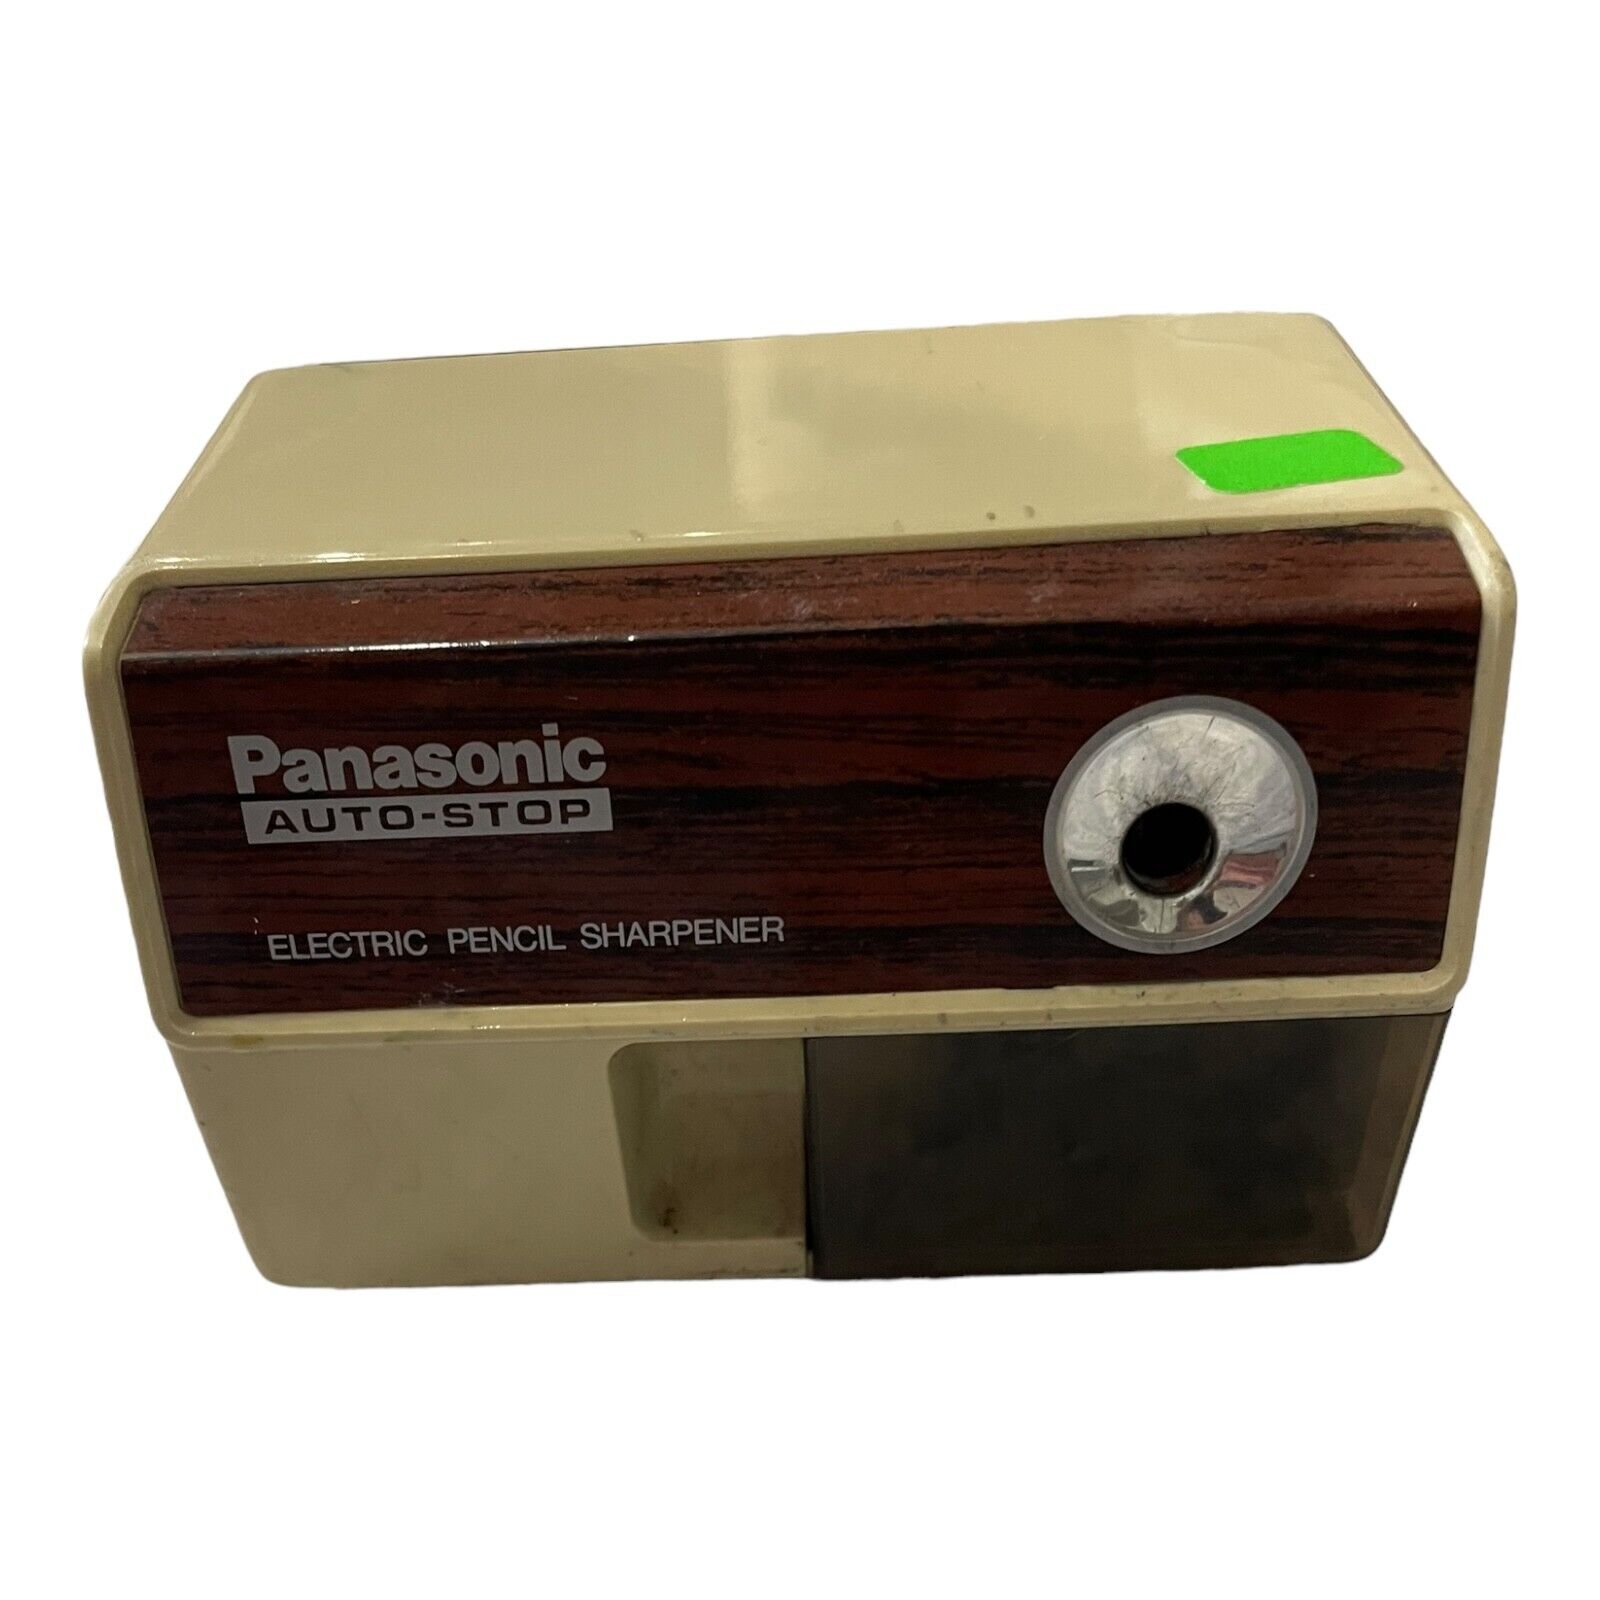 Vintage Panasonic KP-110 Auto Stop Electric Pencil Sharpener Tested Works